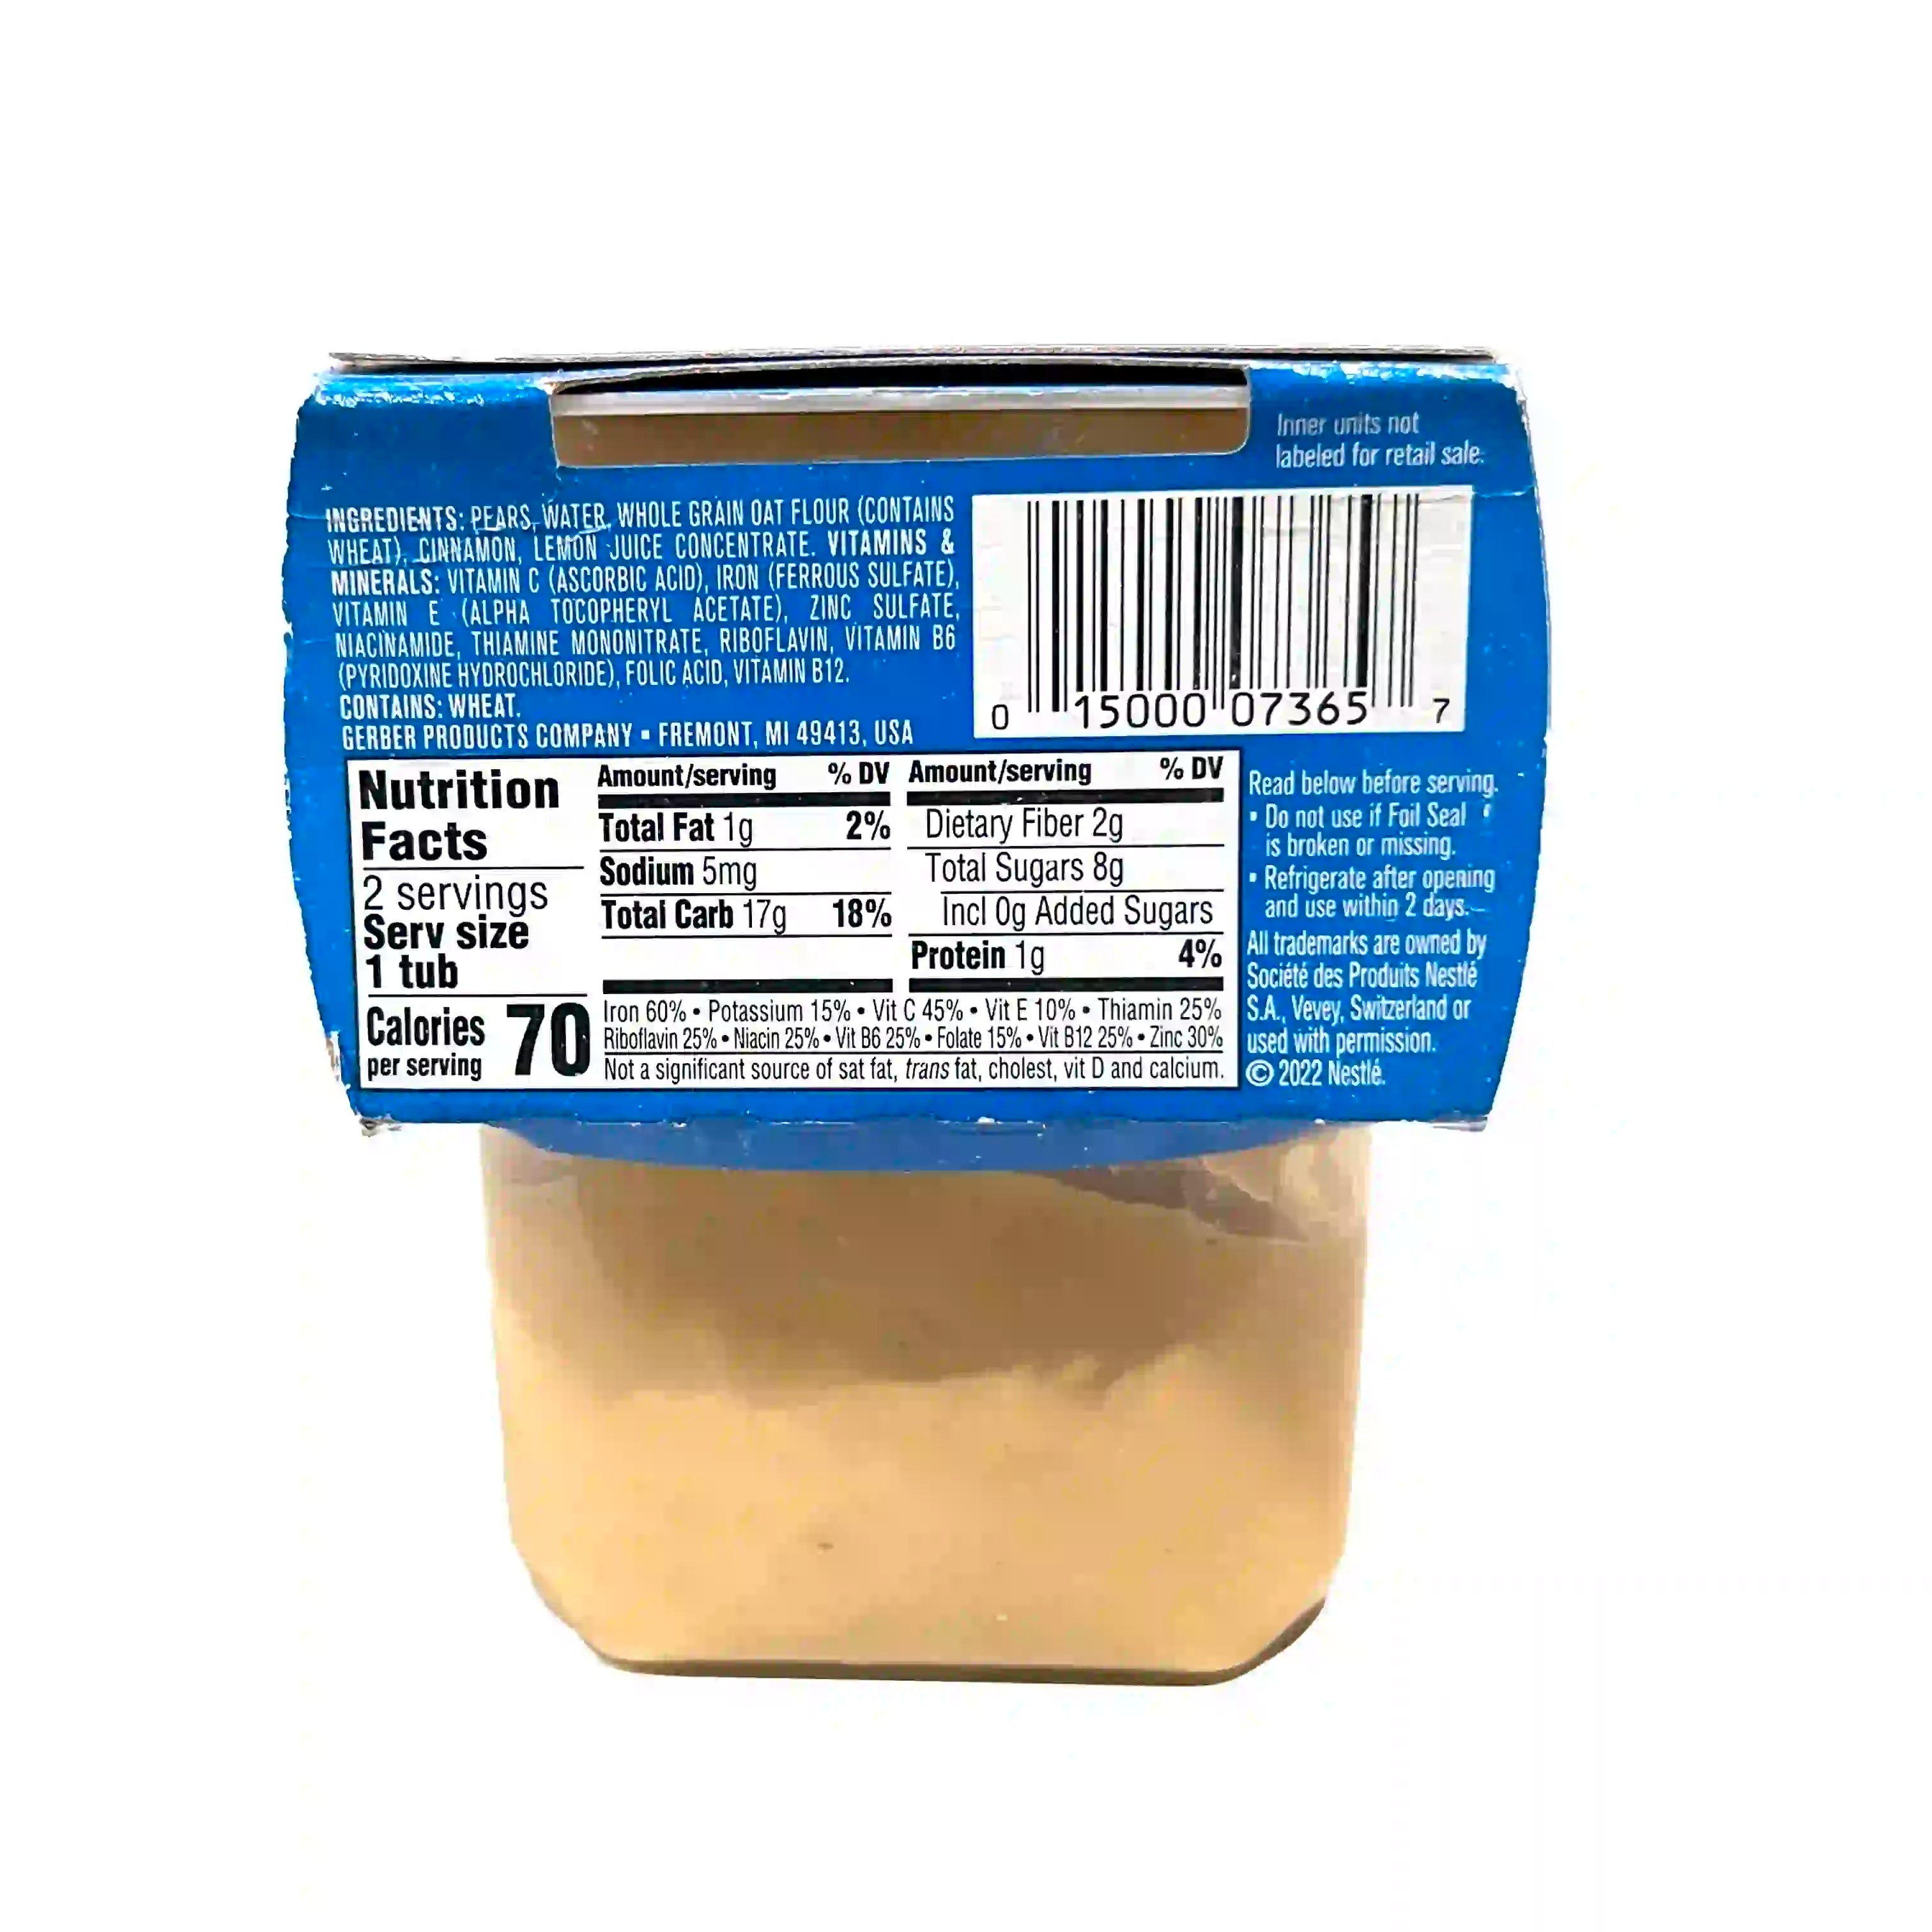 Buy Gerber Oatmeal Cereal Puree with Pear & Cinnamon Online in India at uyyaala.com